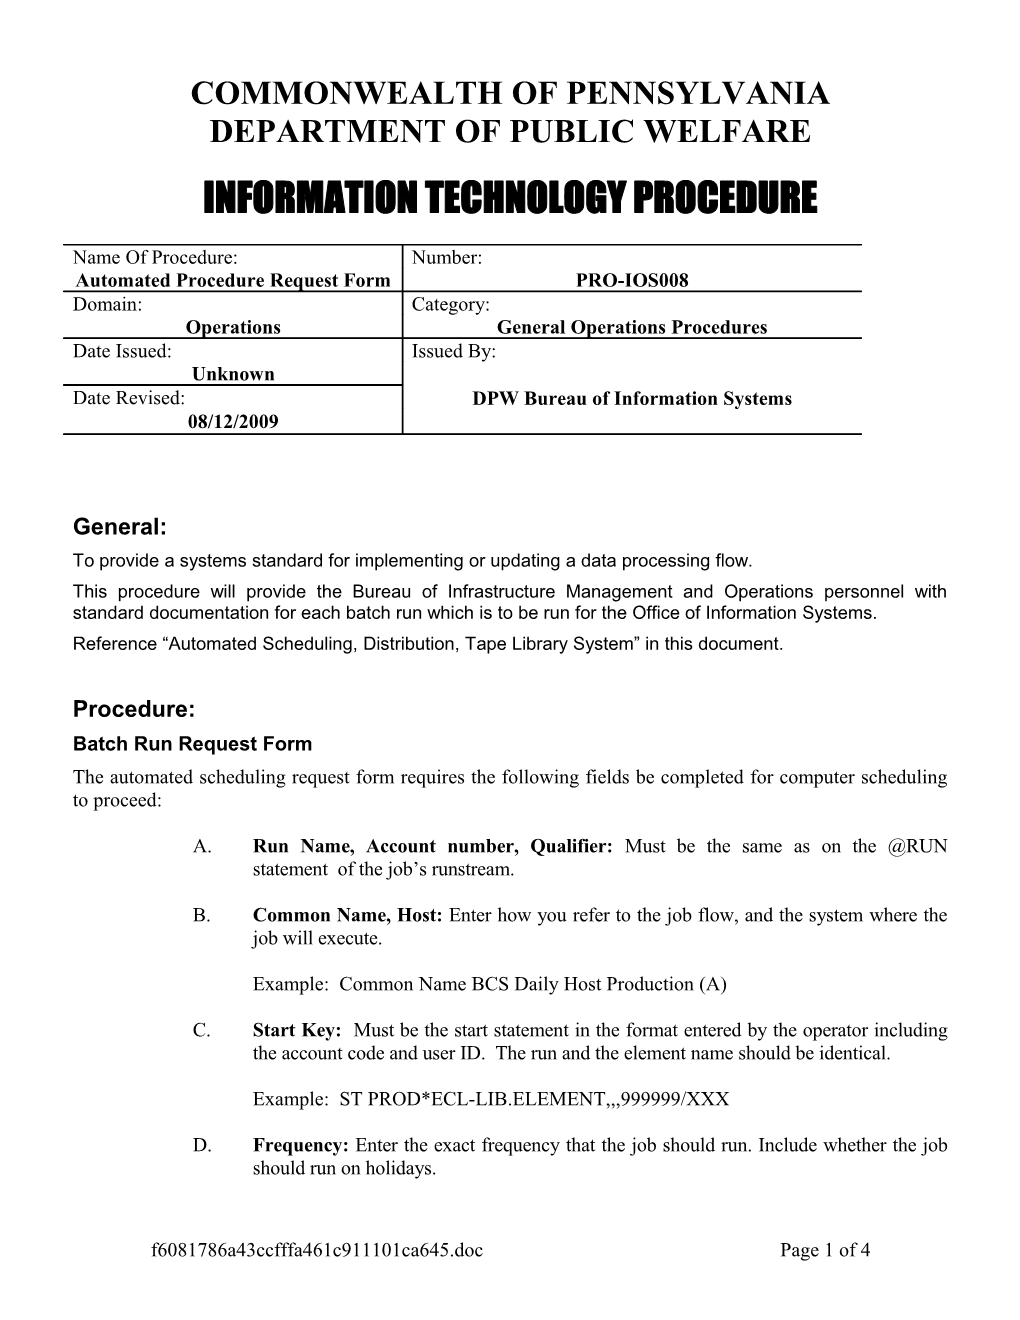 Automated Procedure Request Form